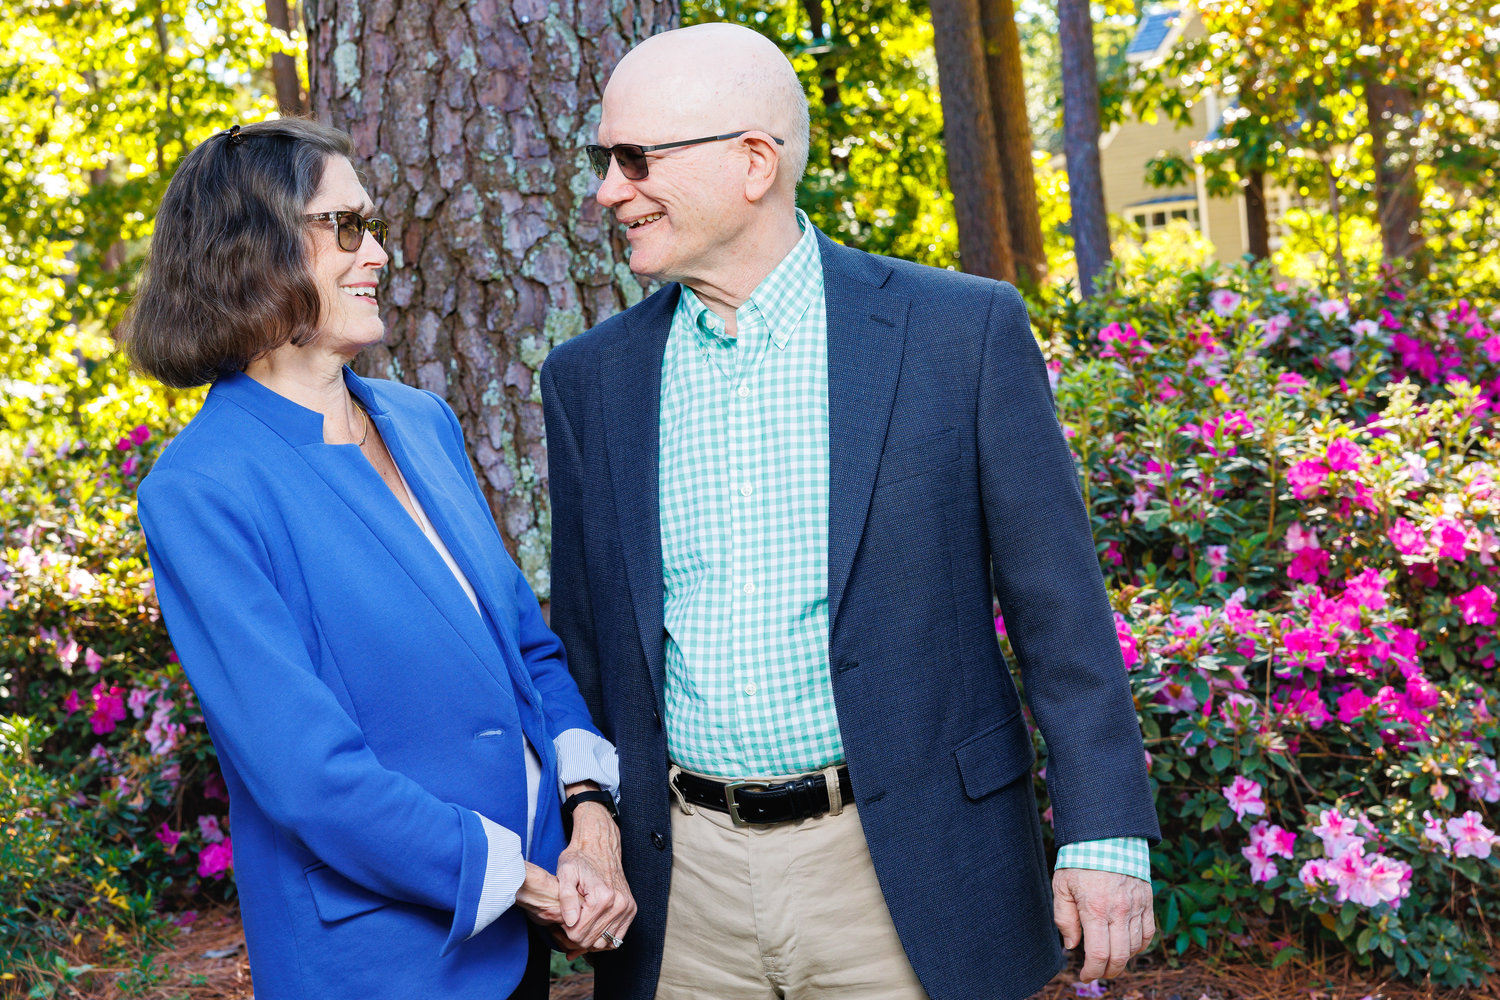 Lucy and Wes Jones’ love story began on a blind date and led to their marriage in 1975.